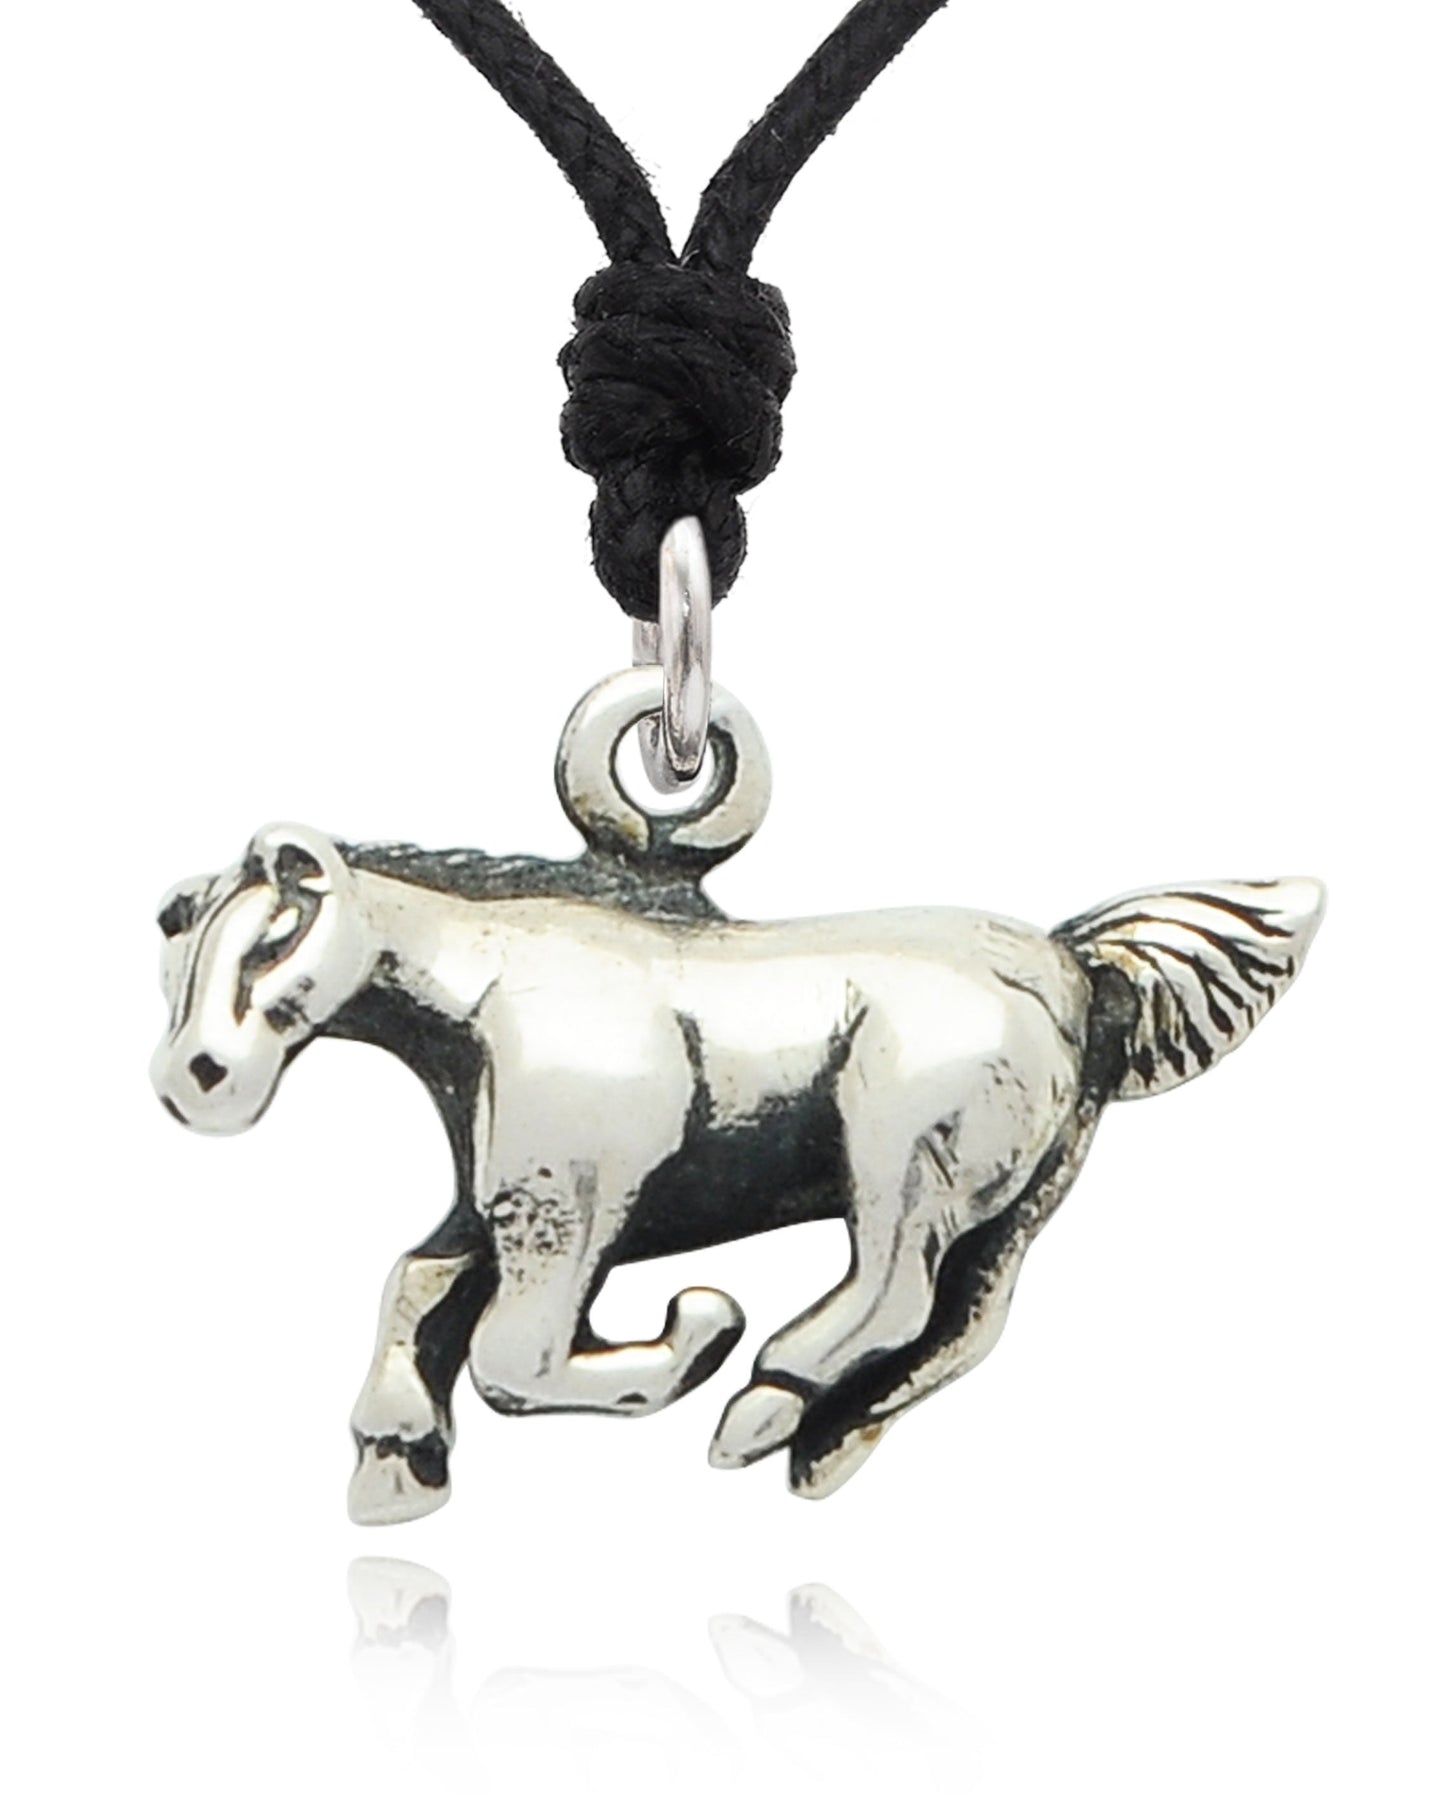 Year Of Zodiac Silver Pewter Charm Necklace Pendant Jewelry